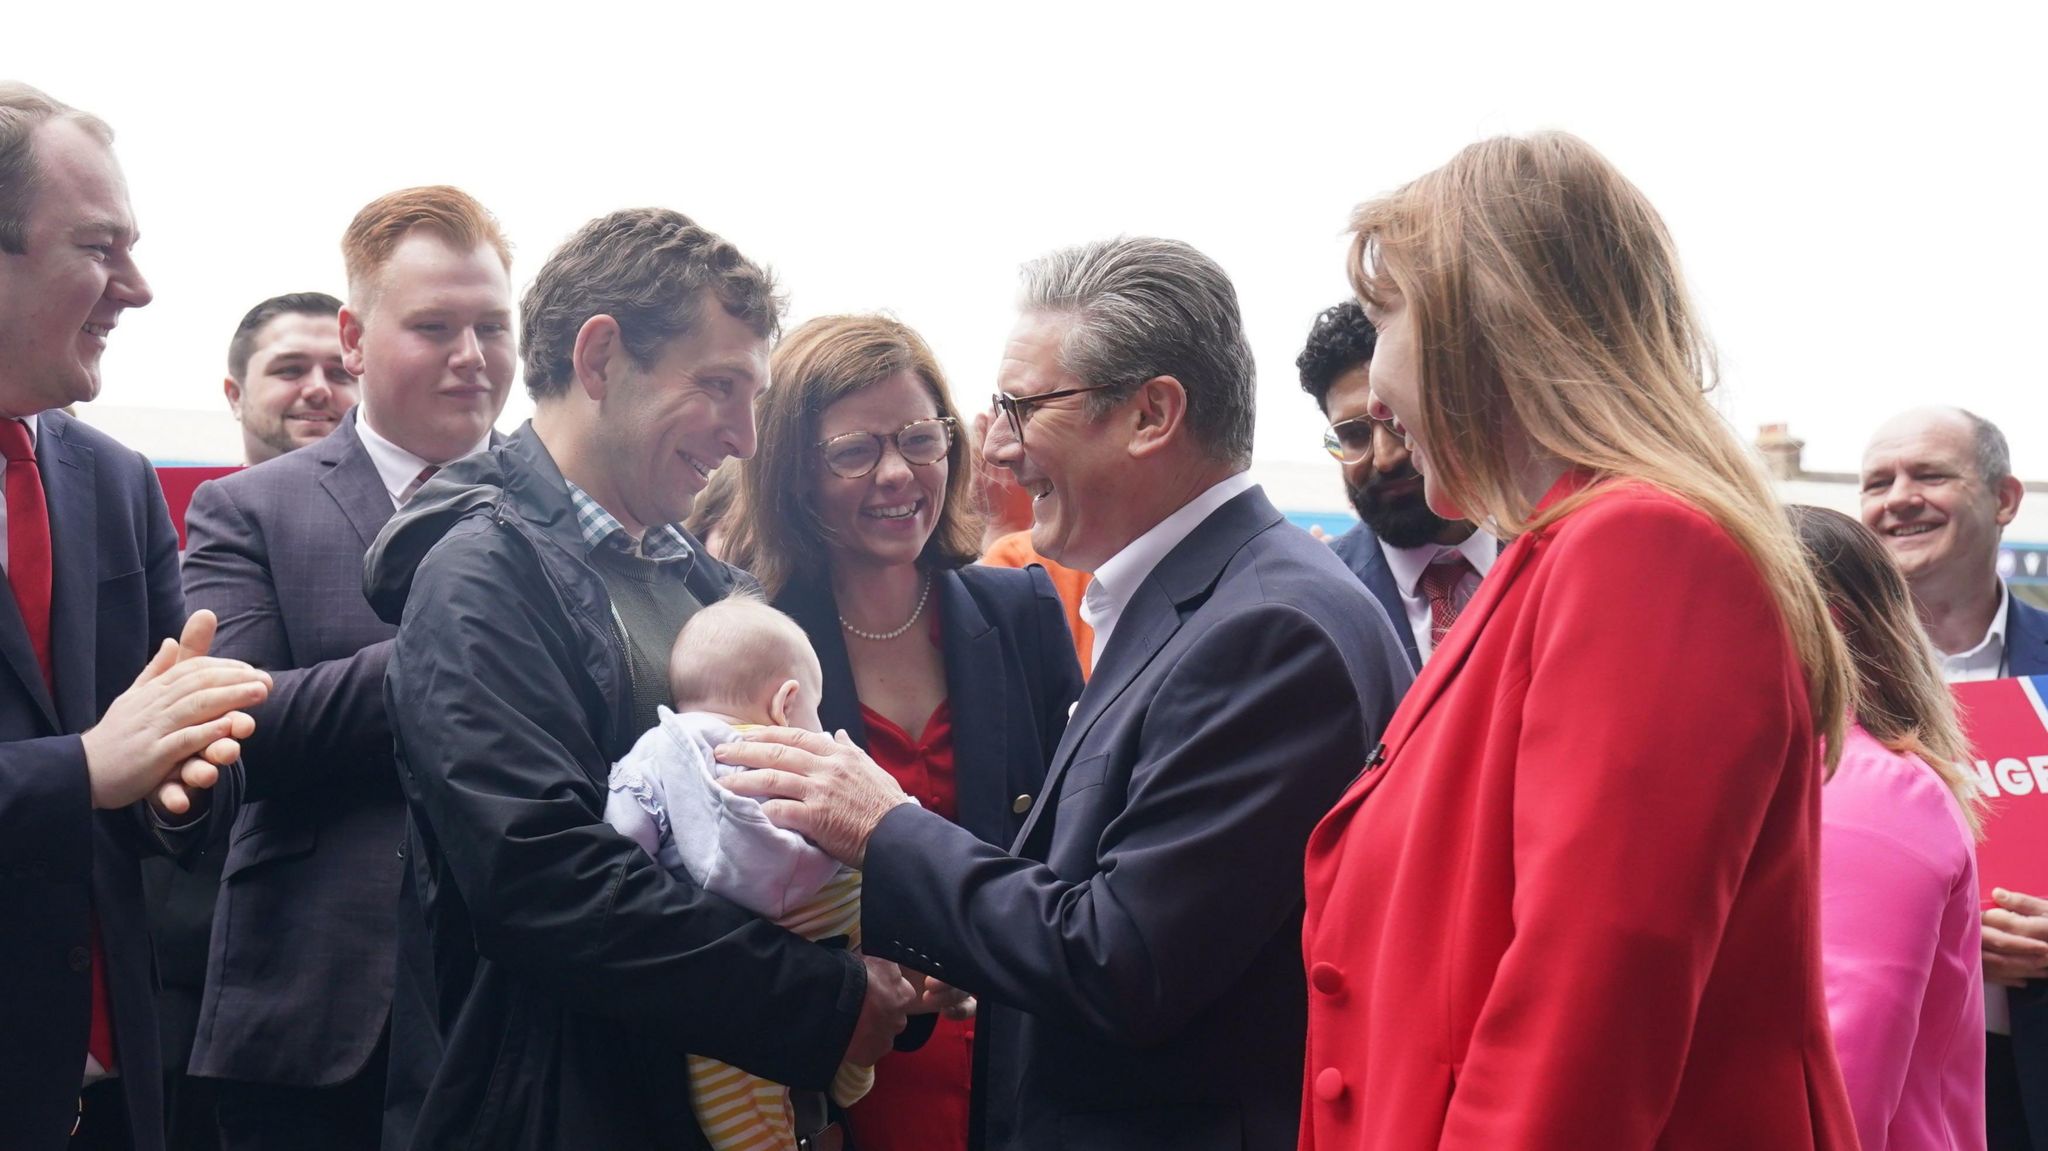 Sir Keir Starmer greets a man with a baby in Gillingham, Kent